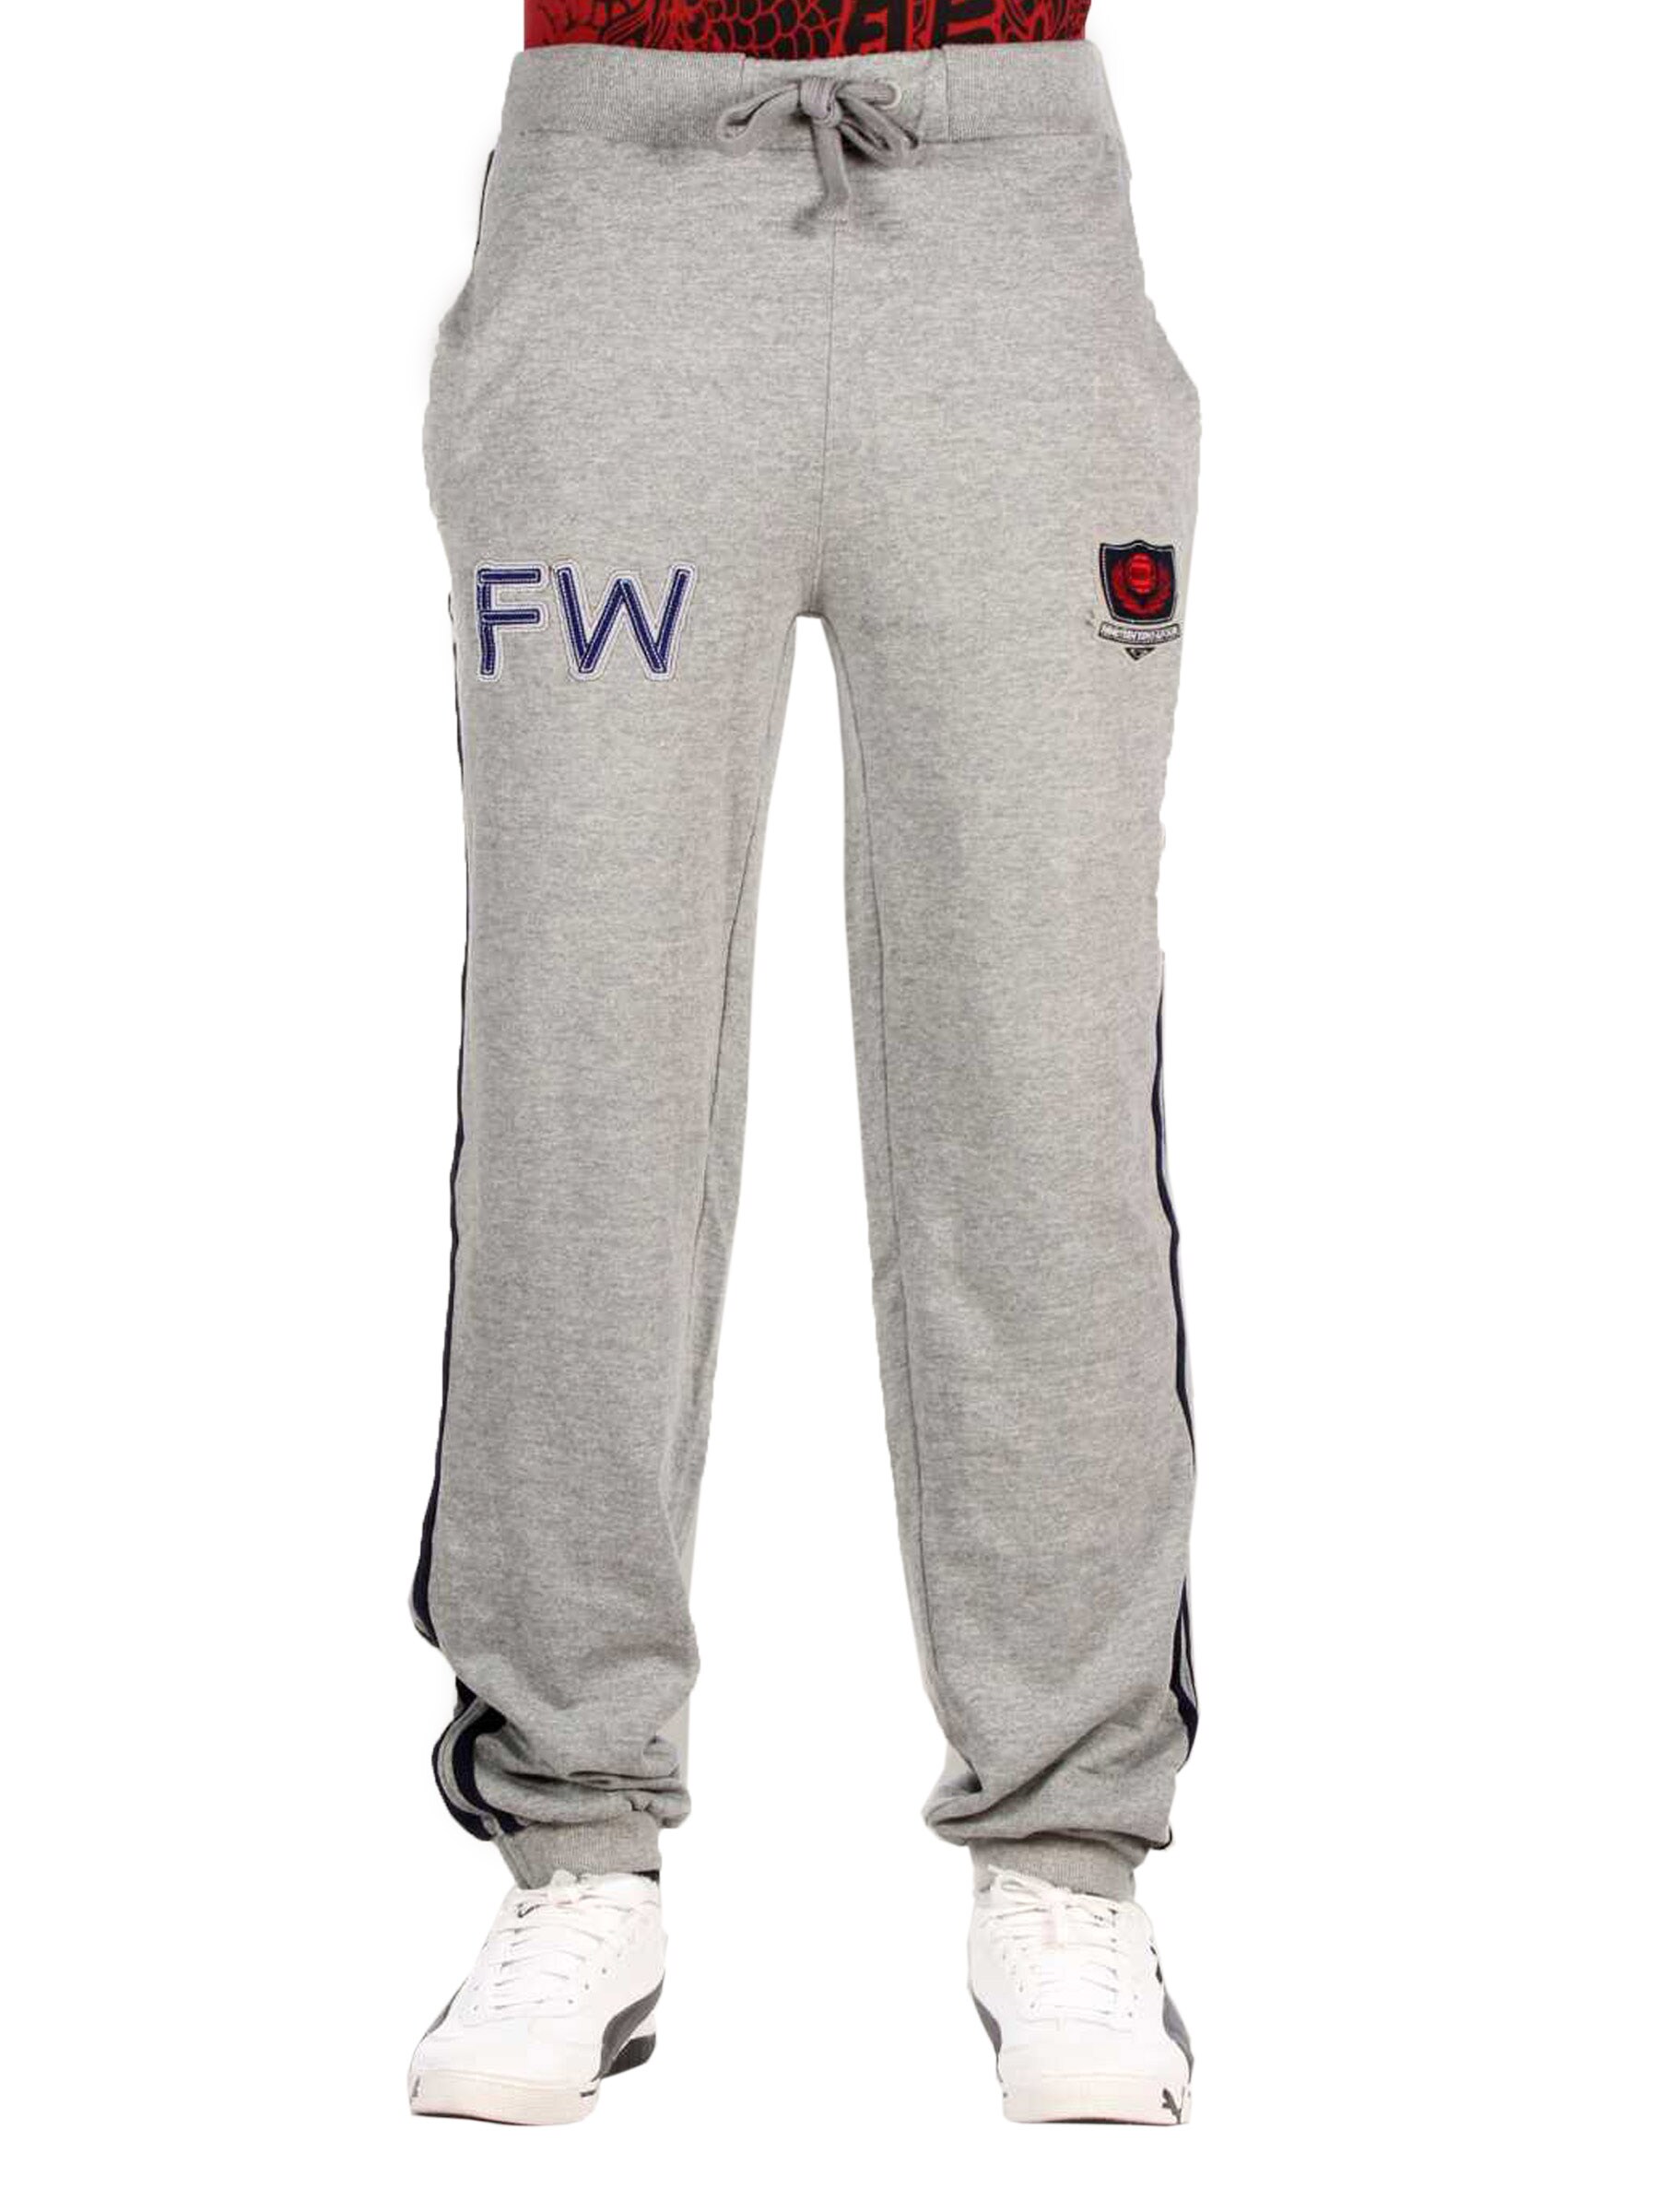 FIFA Mens Heritage Collection Grey Track Pants